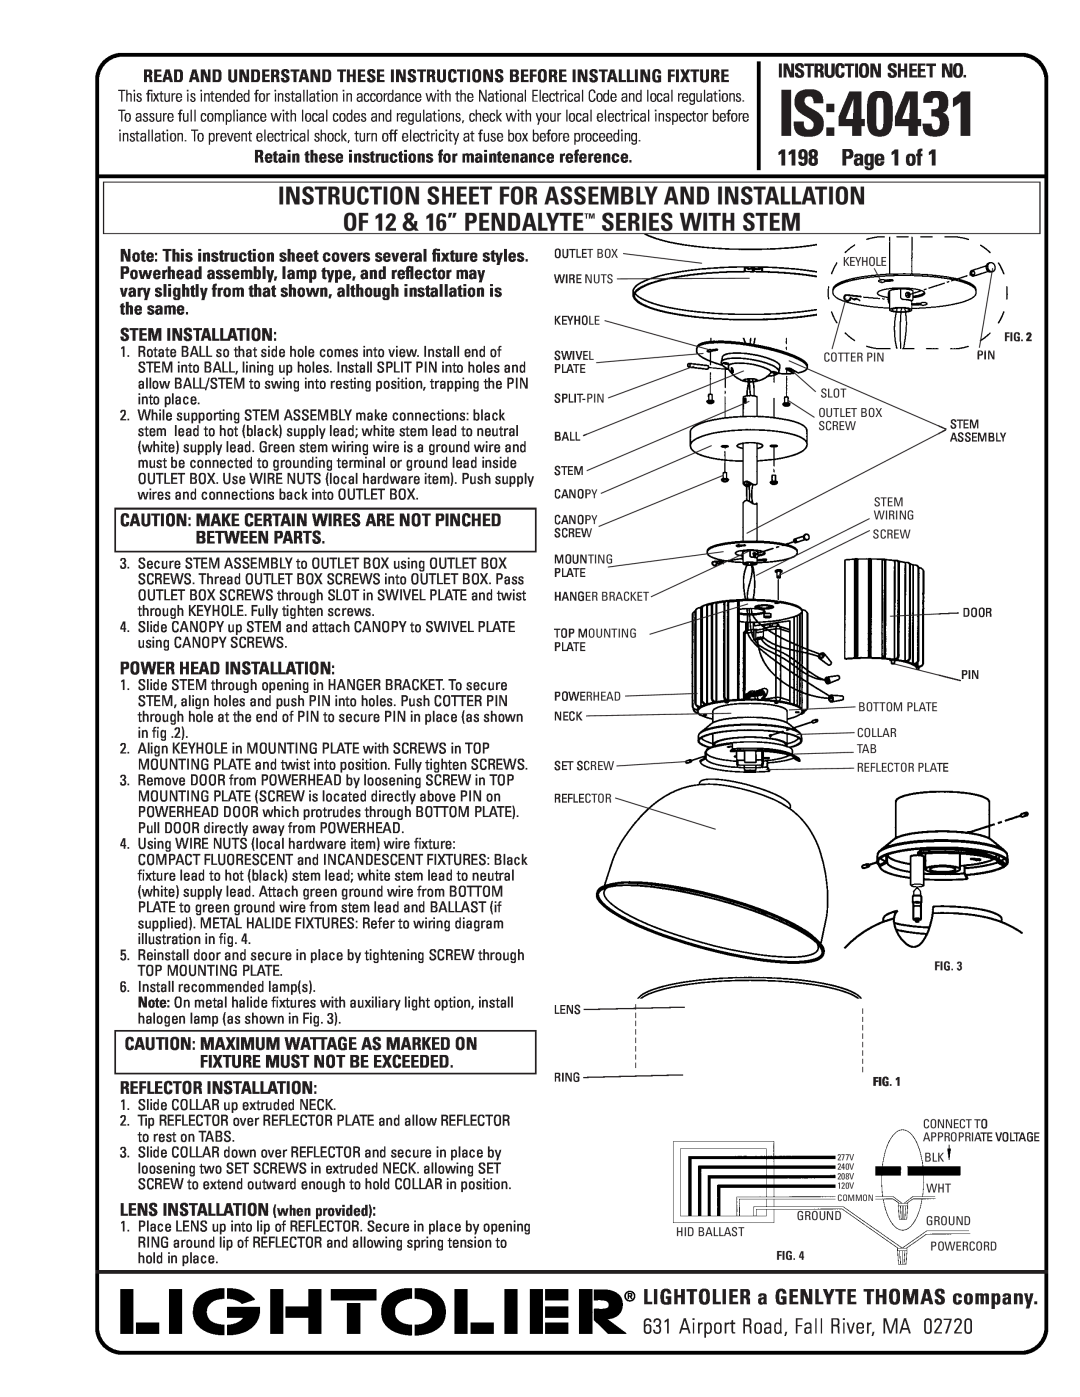 Lightolier IS:40431 instruction sheet Is, Instruction Sheet For Assembly And Installation, 1198, Instruction Sheet No 